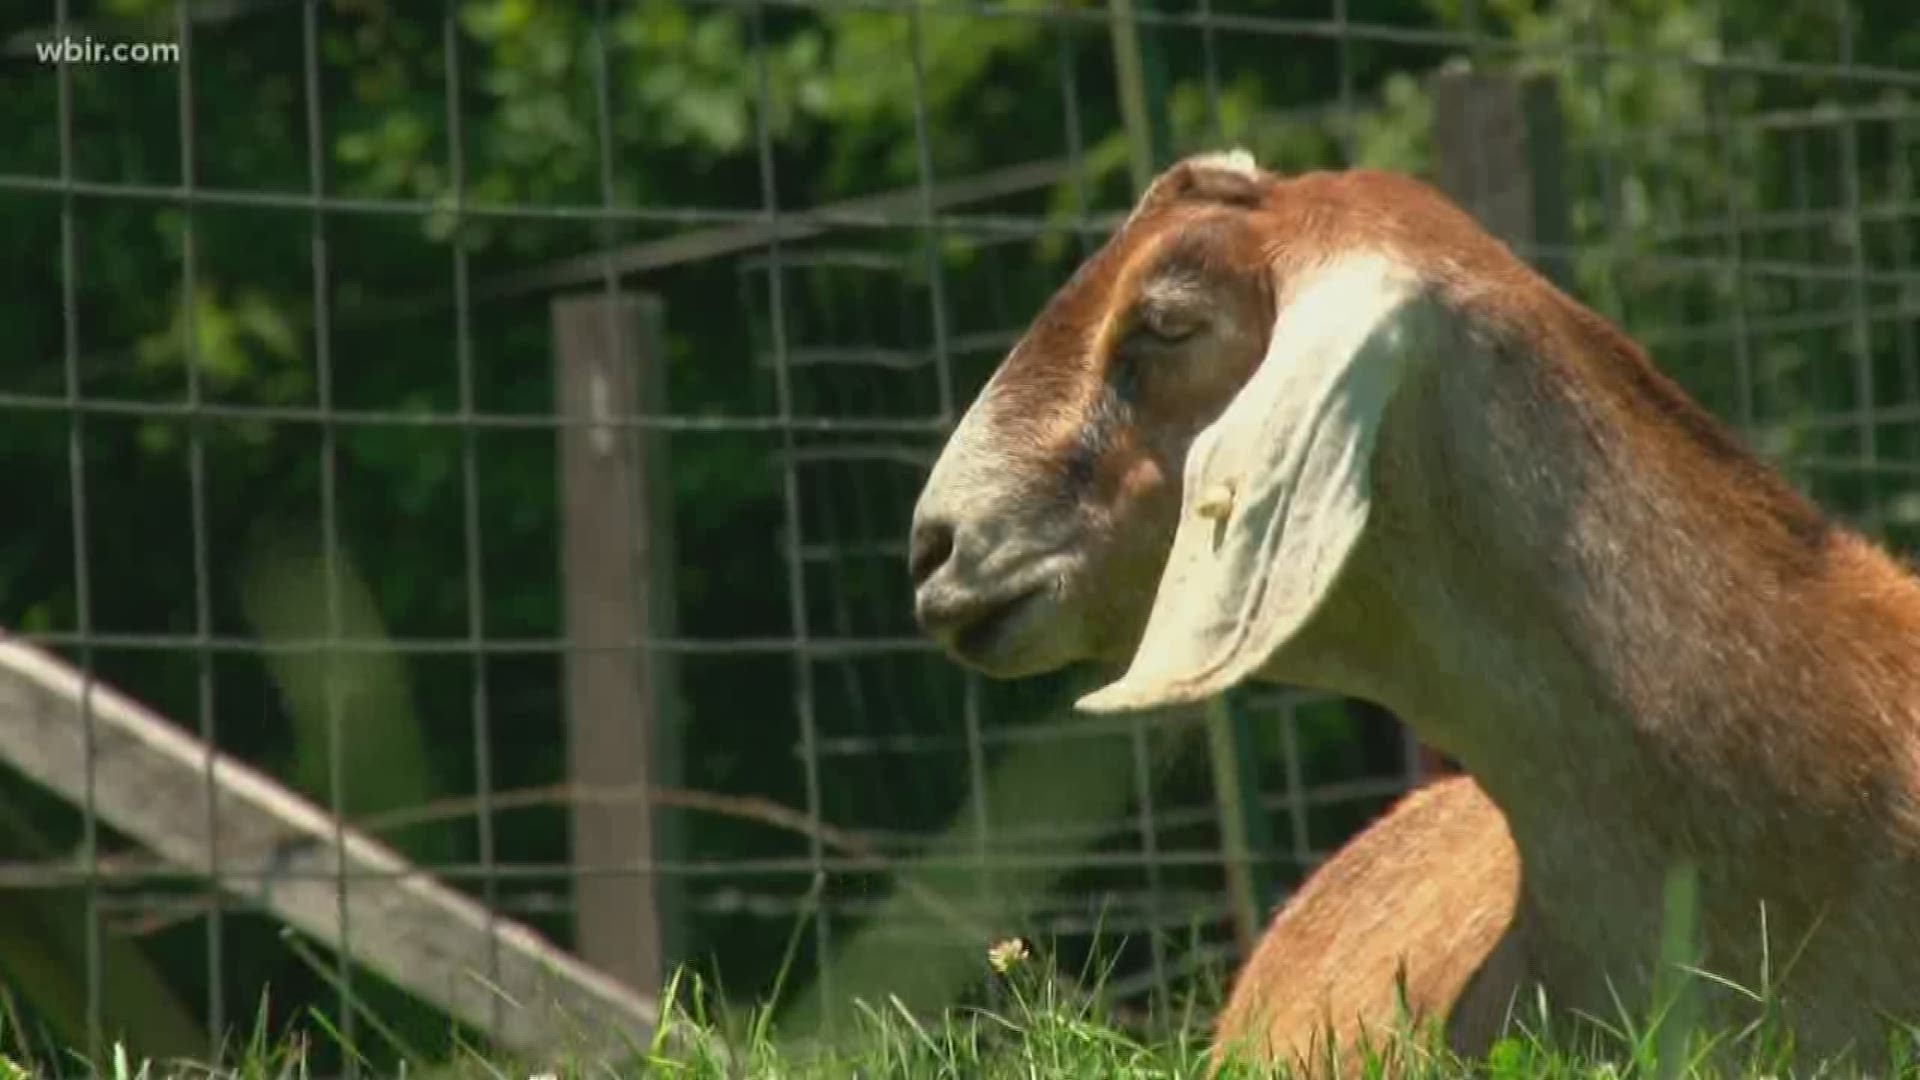 The City of Knoxville has used goat contractors to manage invasive plant species on city property since 2010.